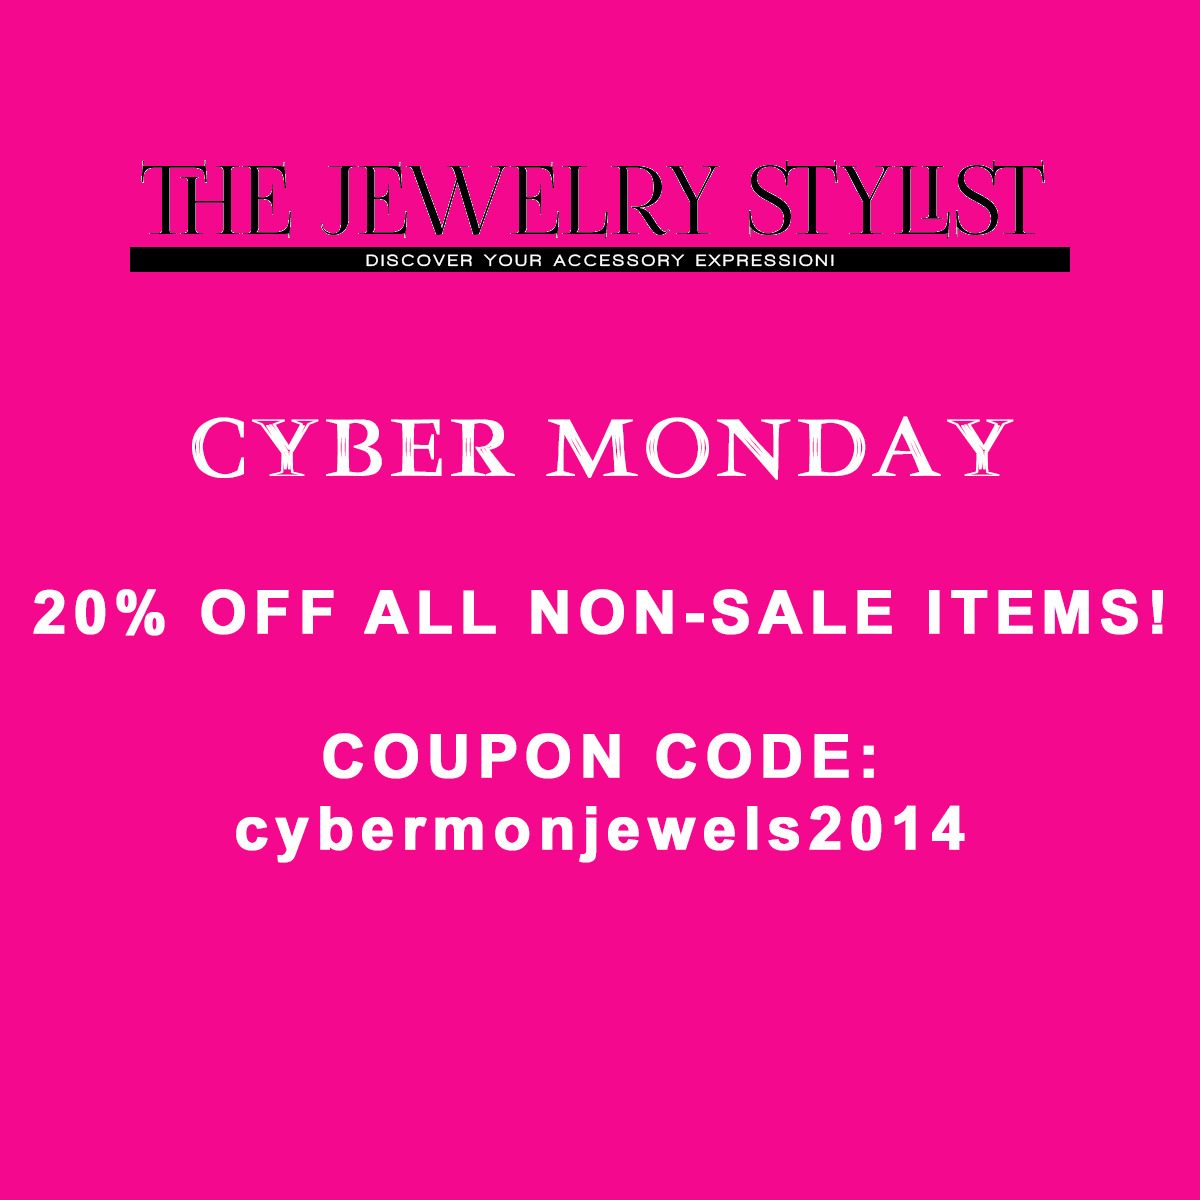 The Jewelry Stylist Cyber Monday Sale 20% Off Coupon Code